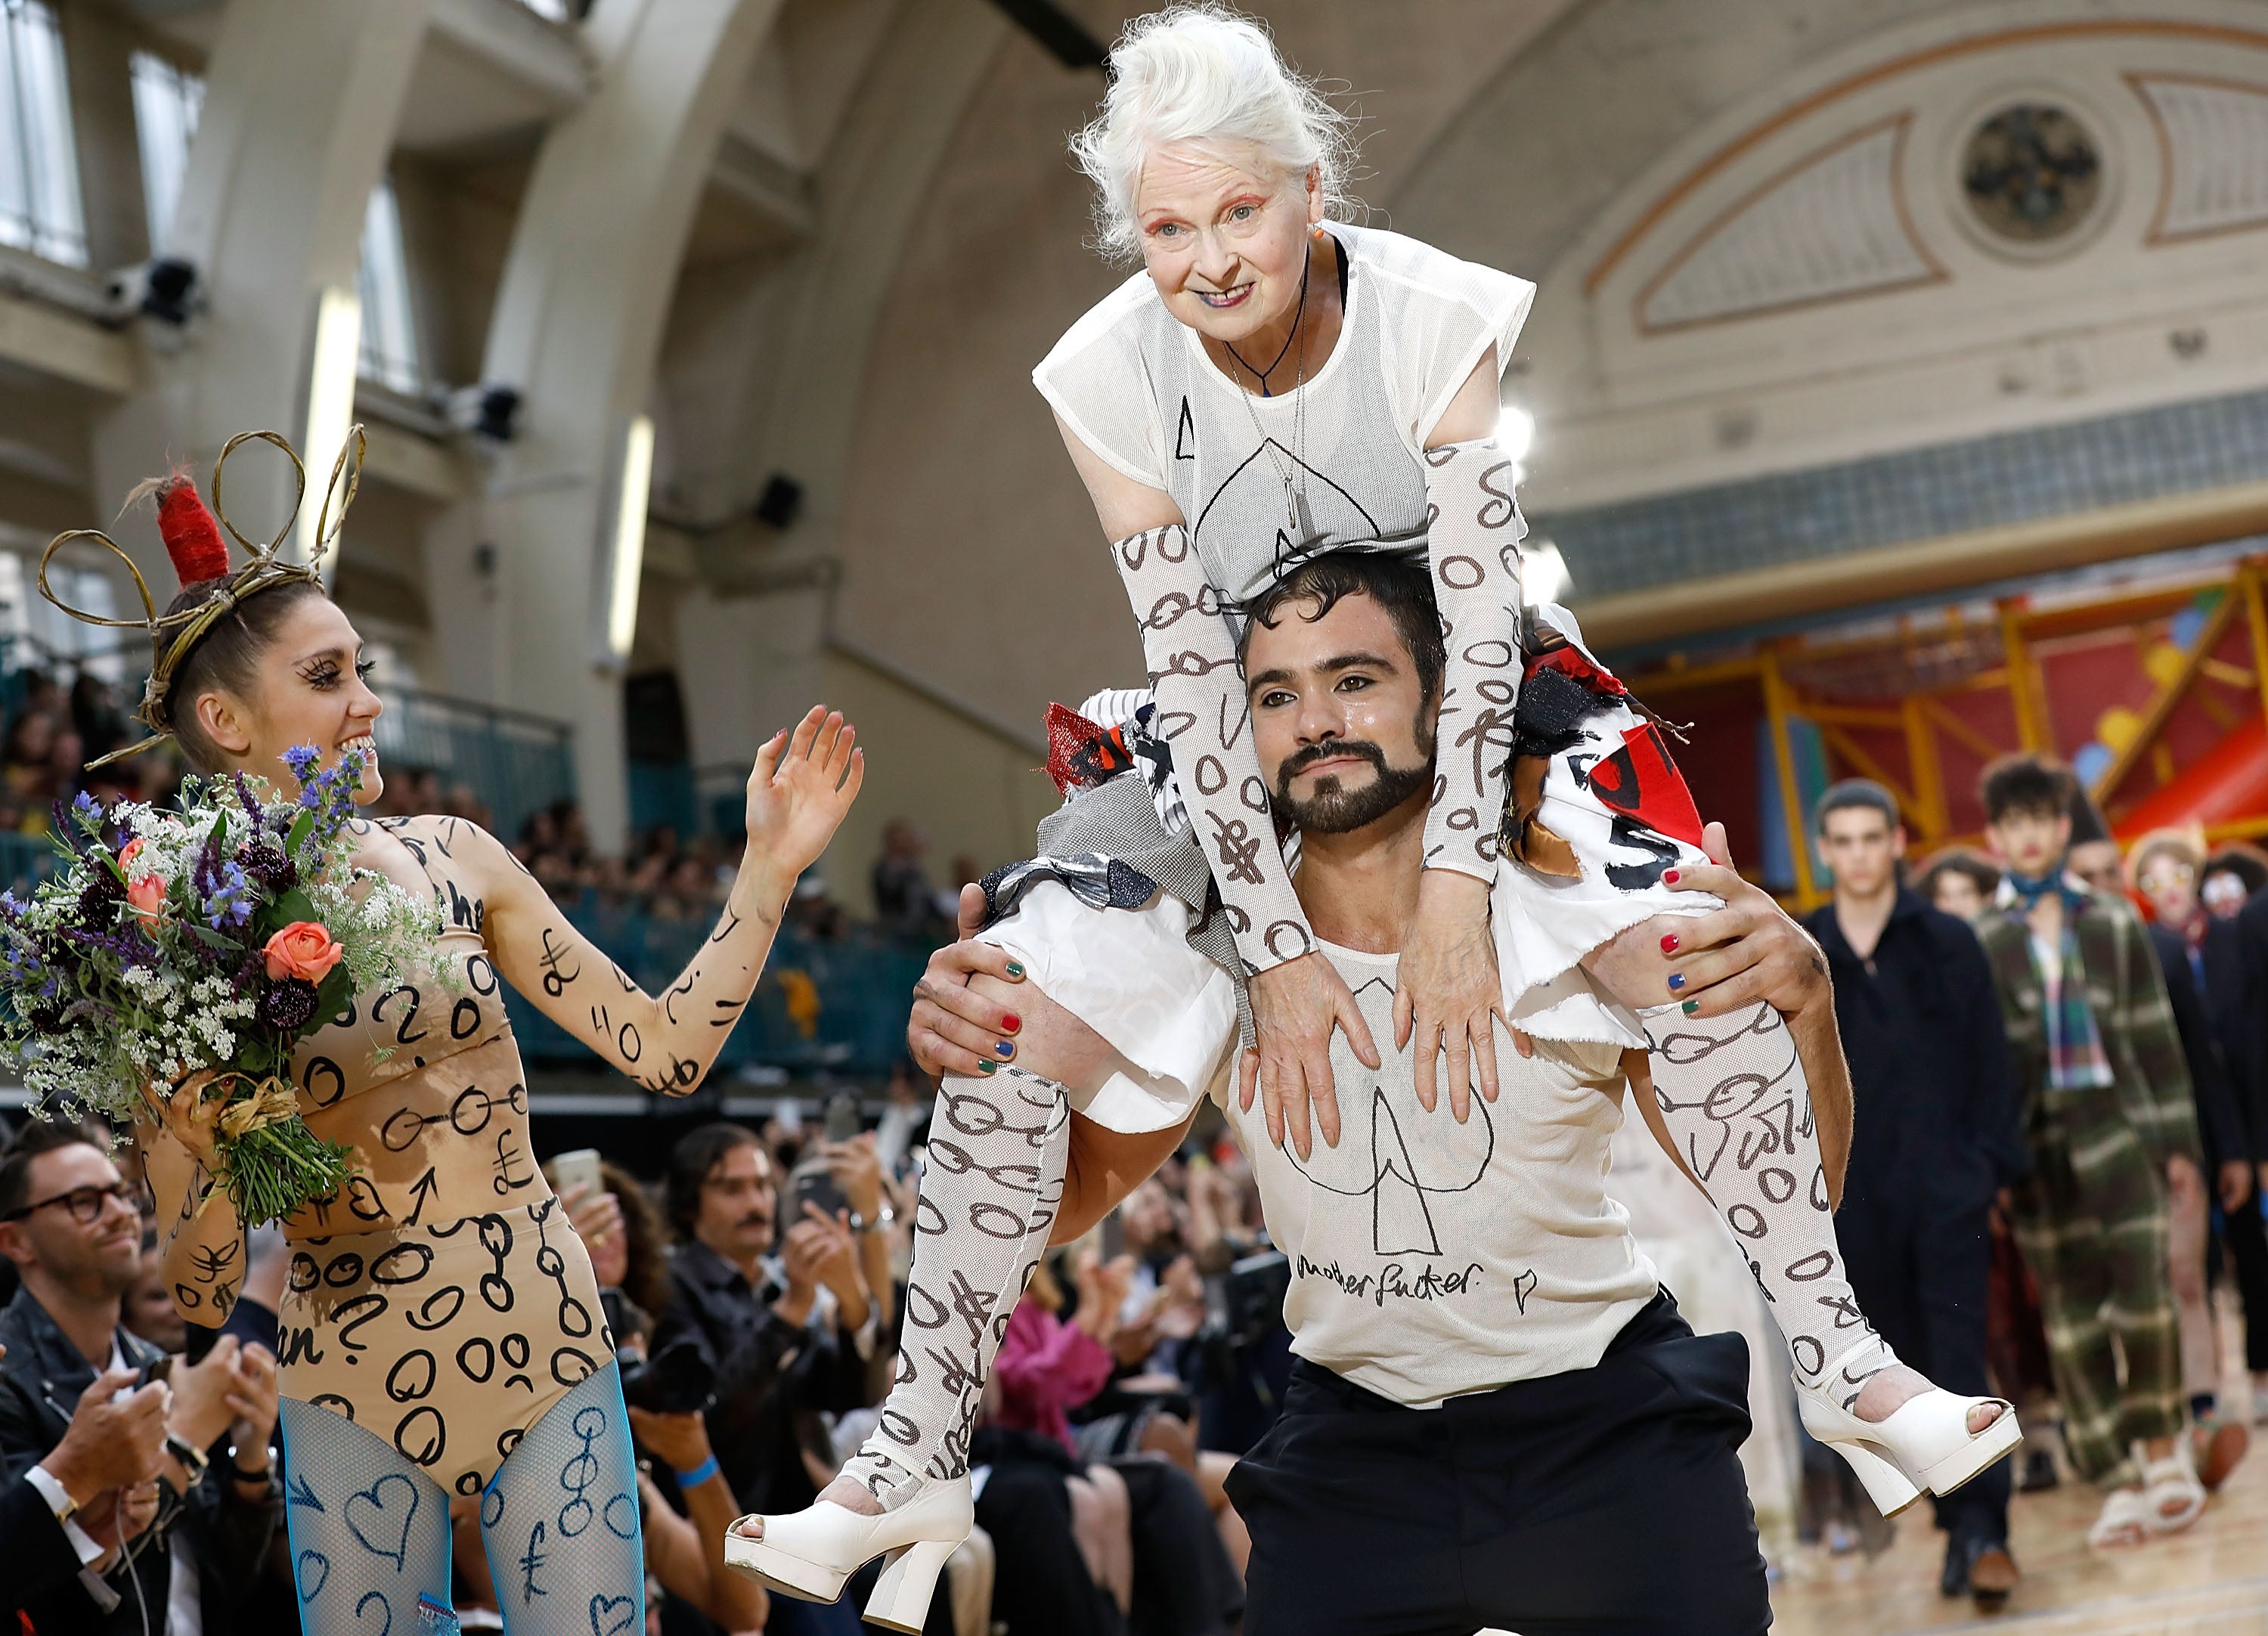 On top: Westwood gets a lift down the runway at Men’s London Fashion Week in June 2017